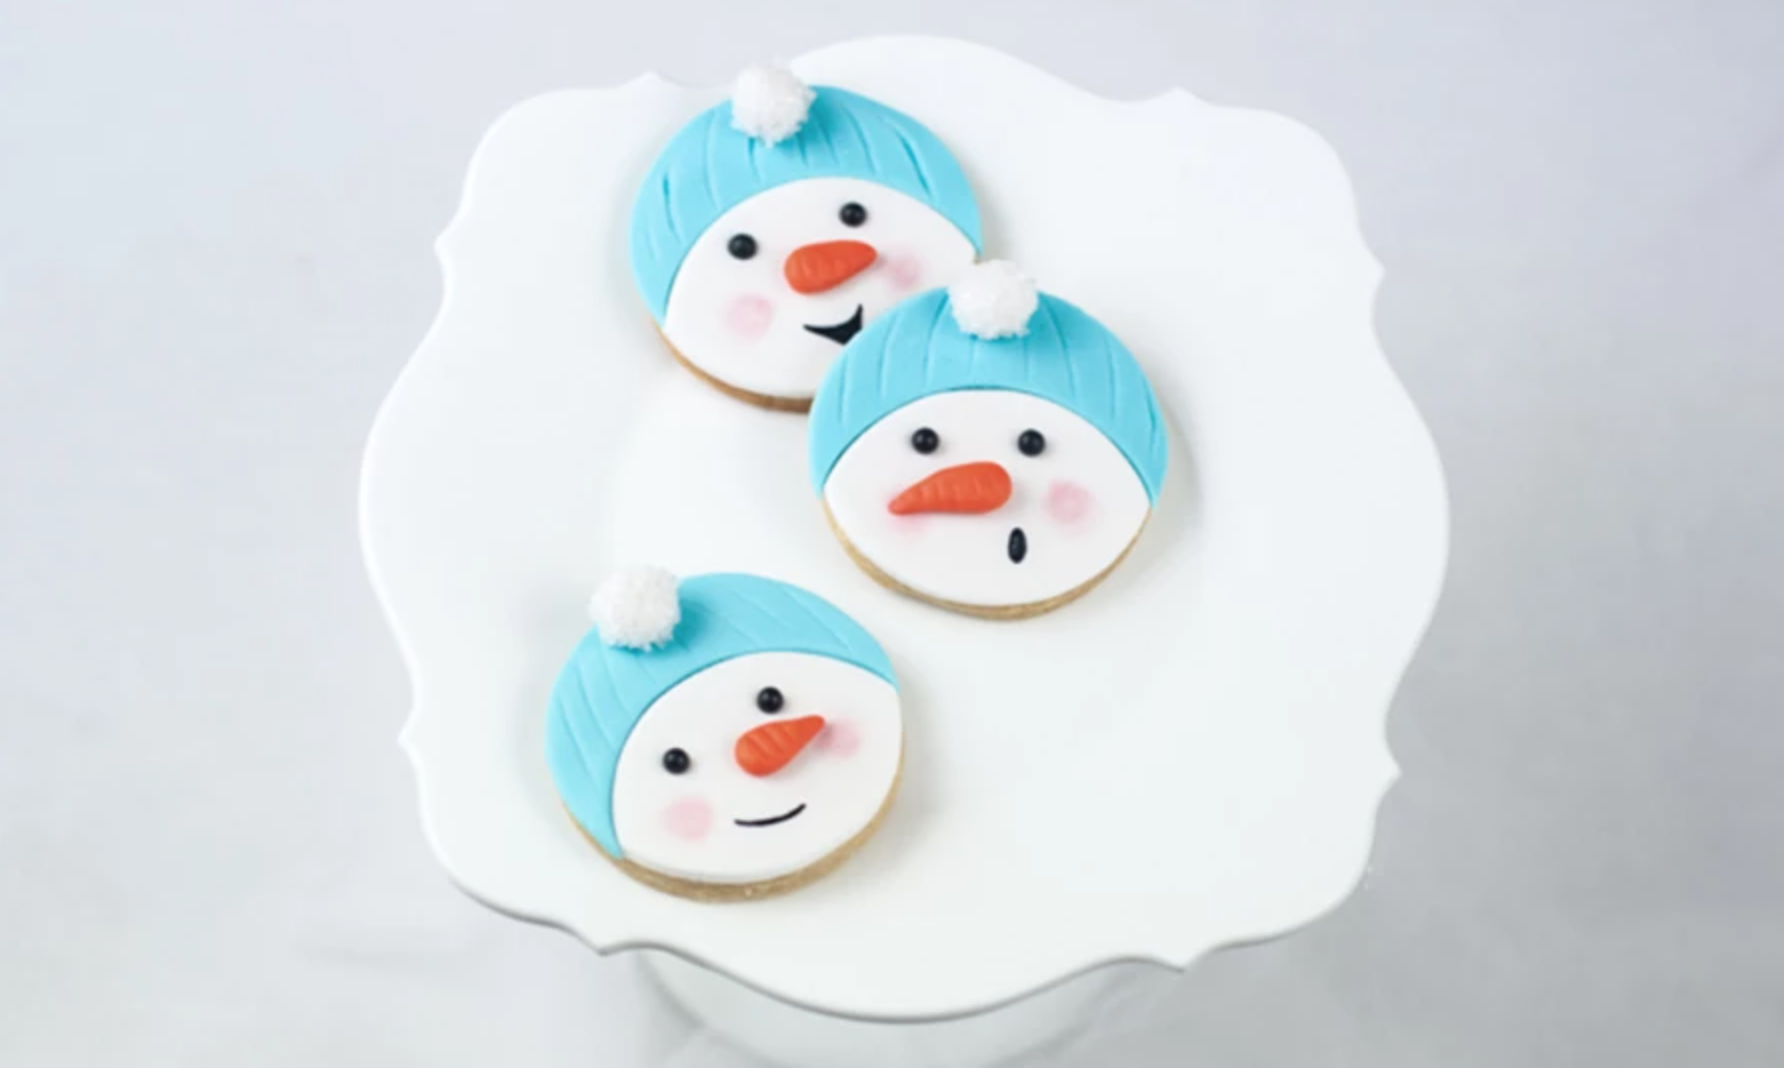 snowman cookies on a white plate